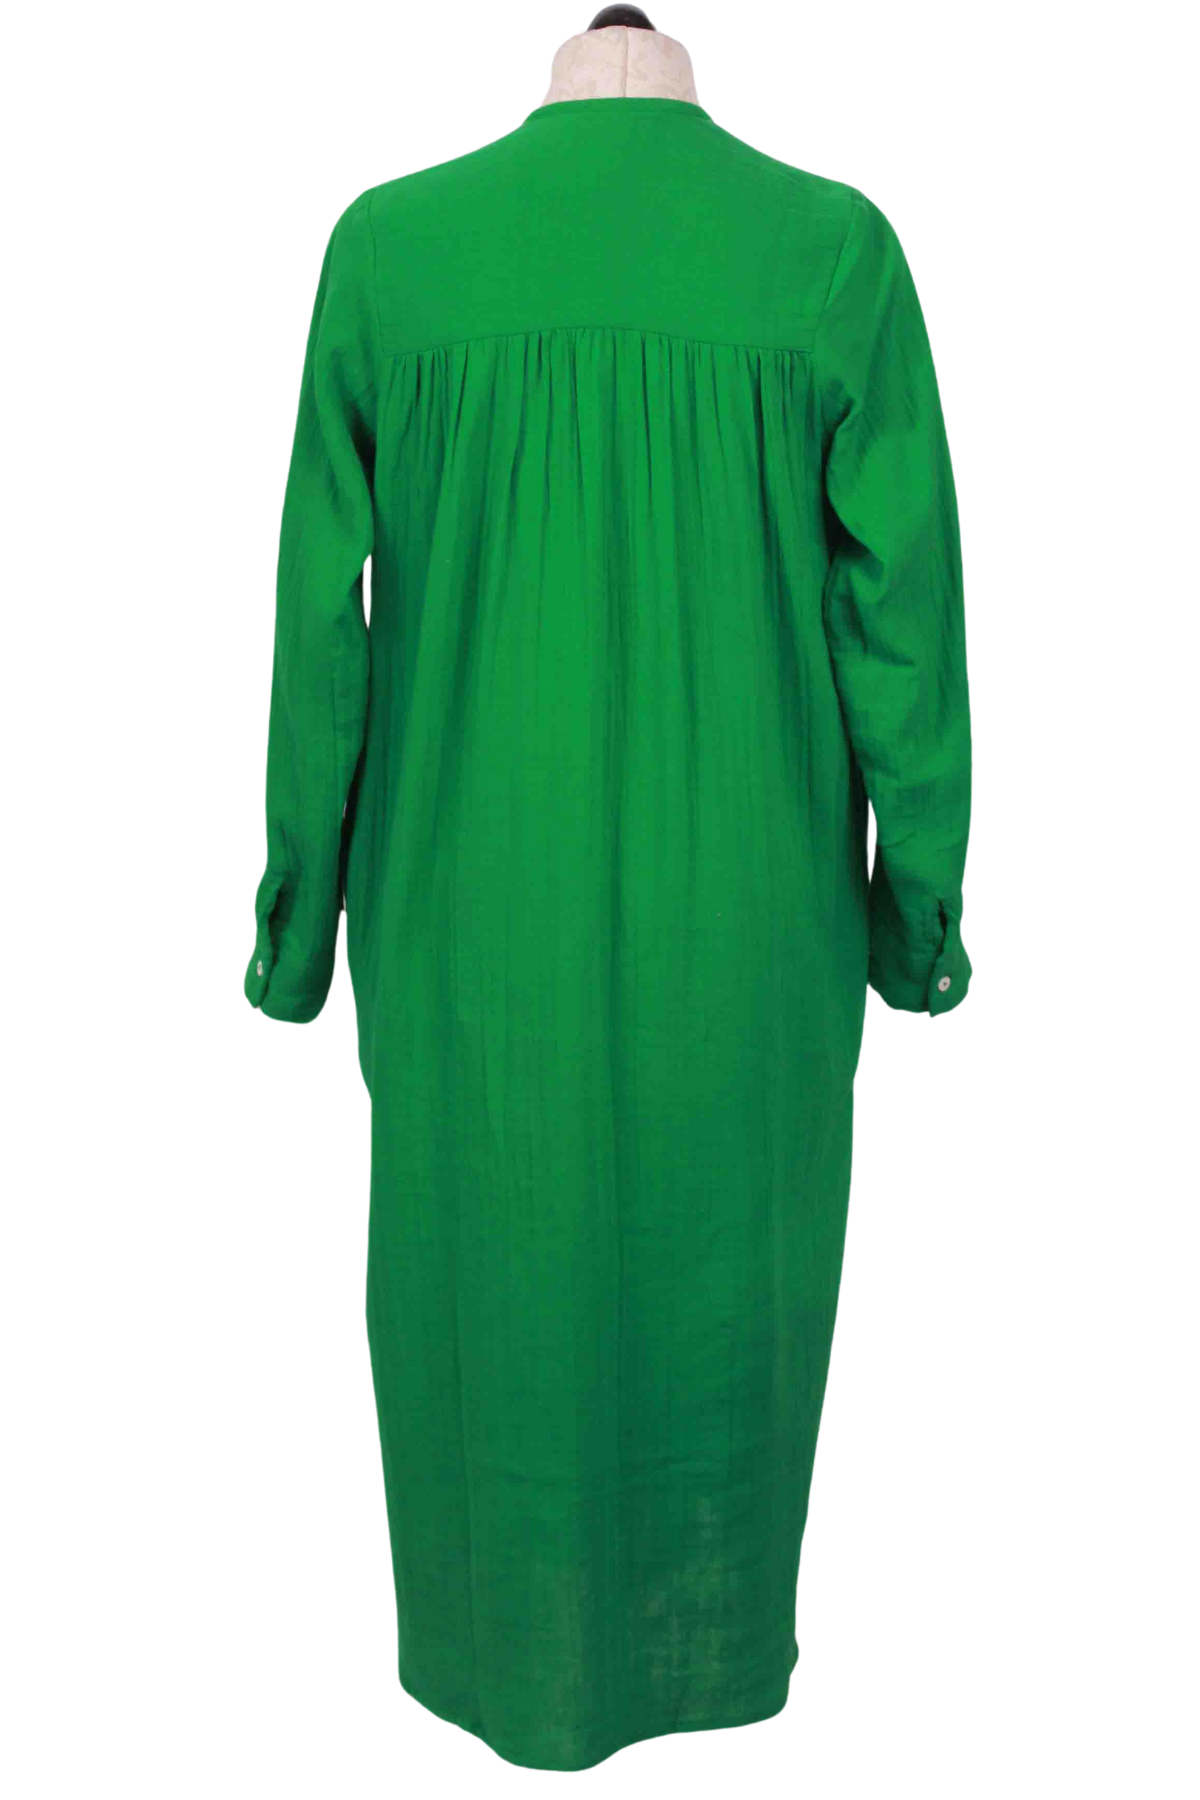 back view of Kelly Green Gauzy Cotton Jasmine Shirt Dress by Mille